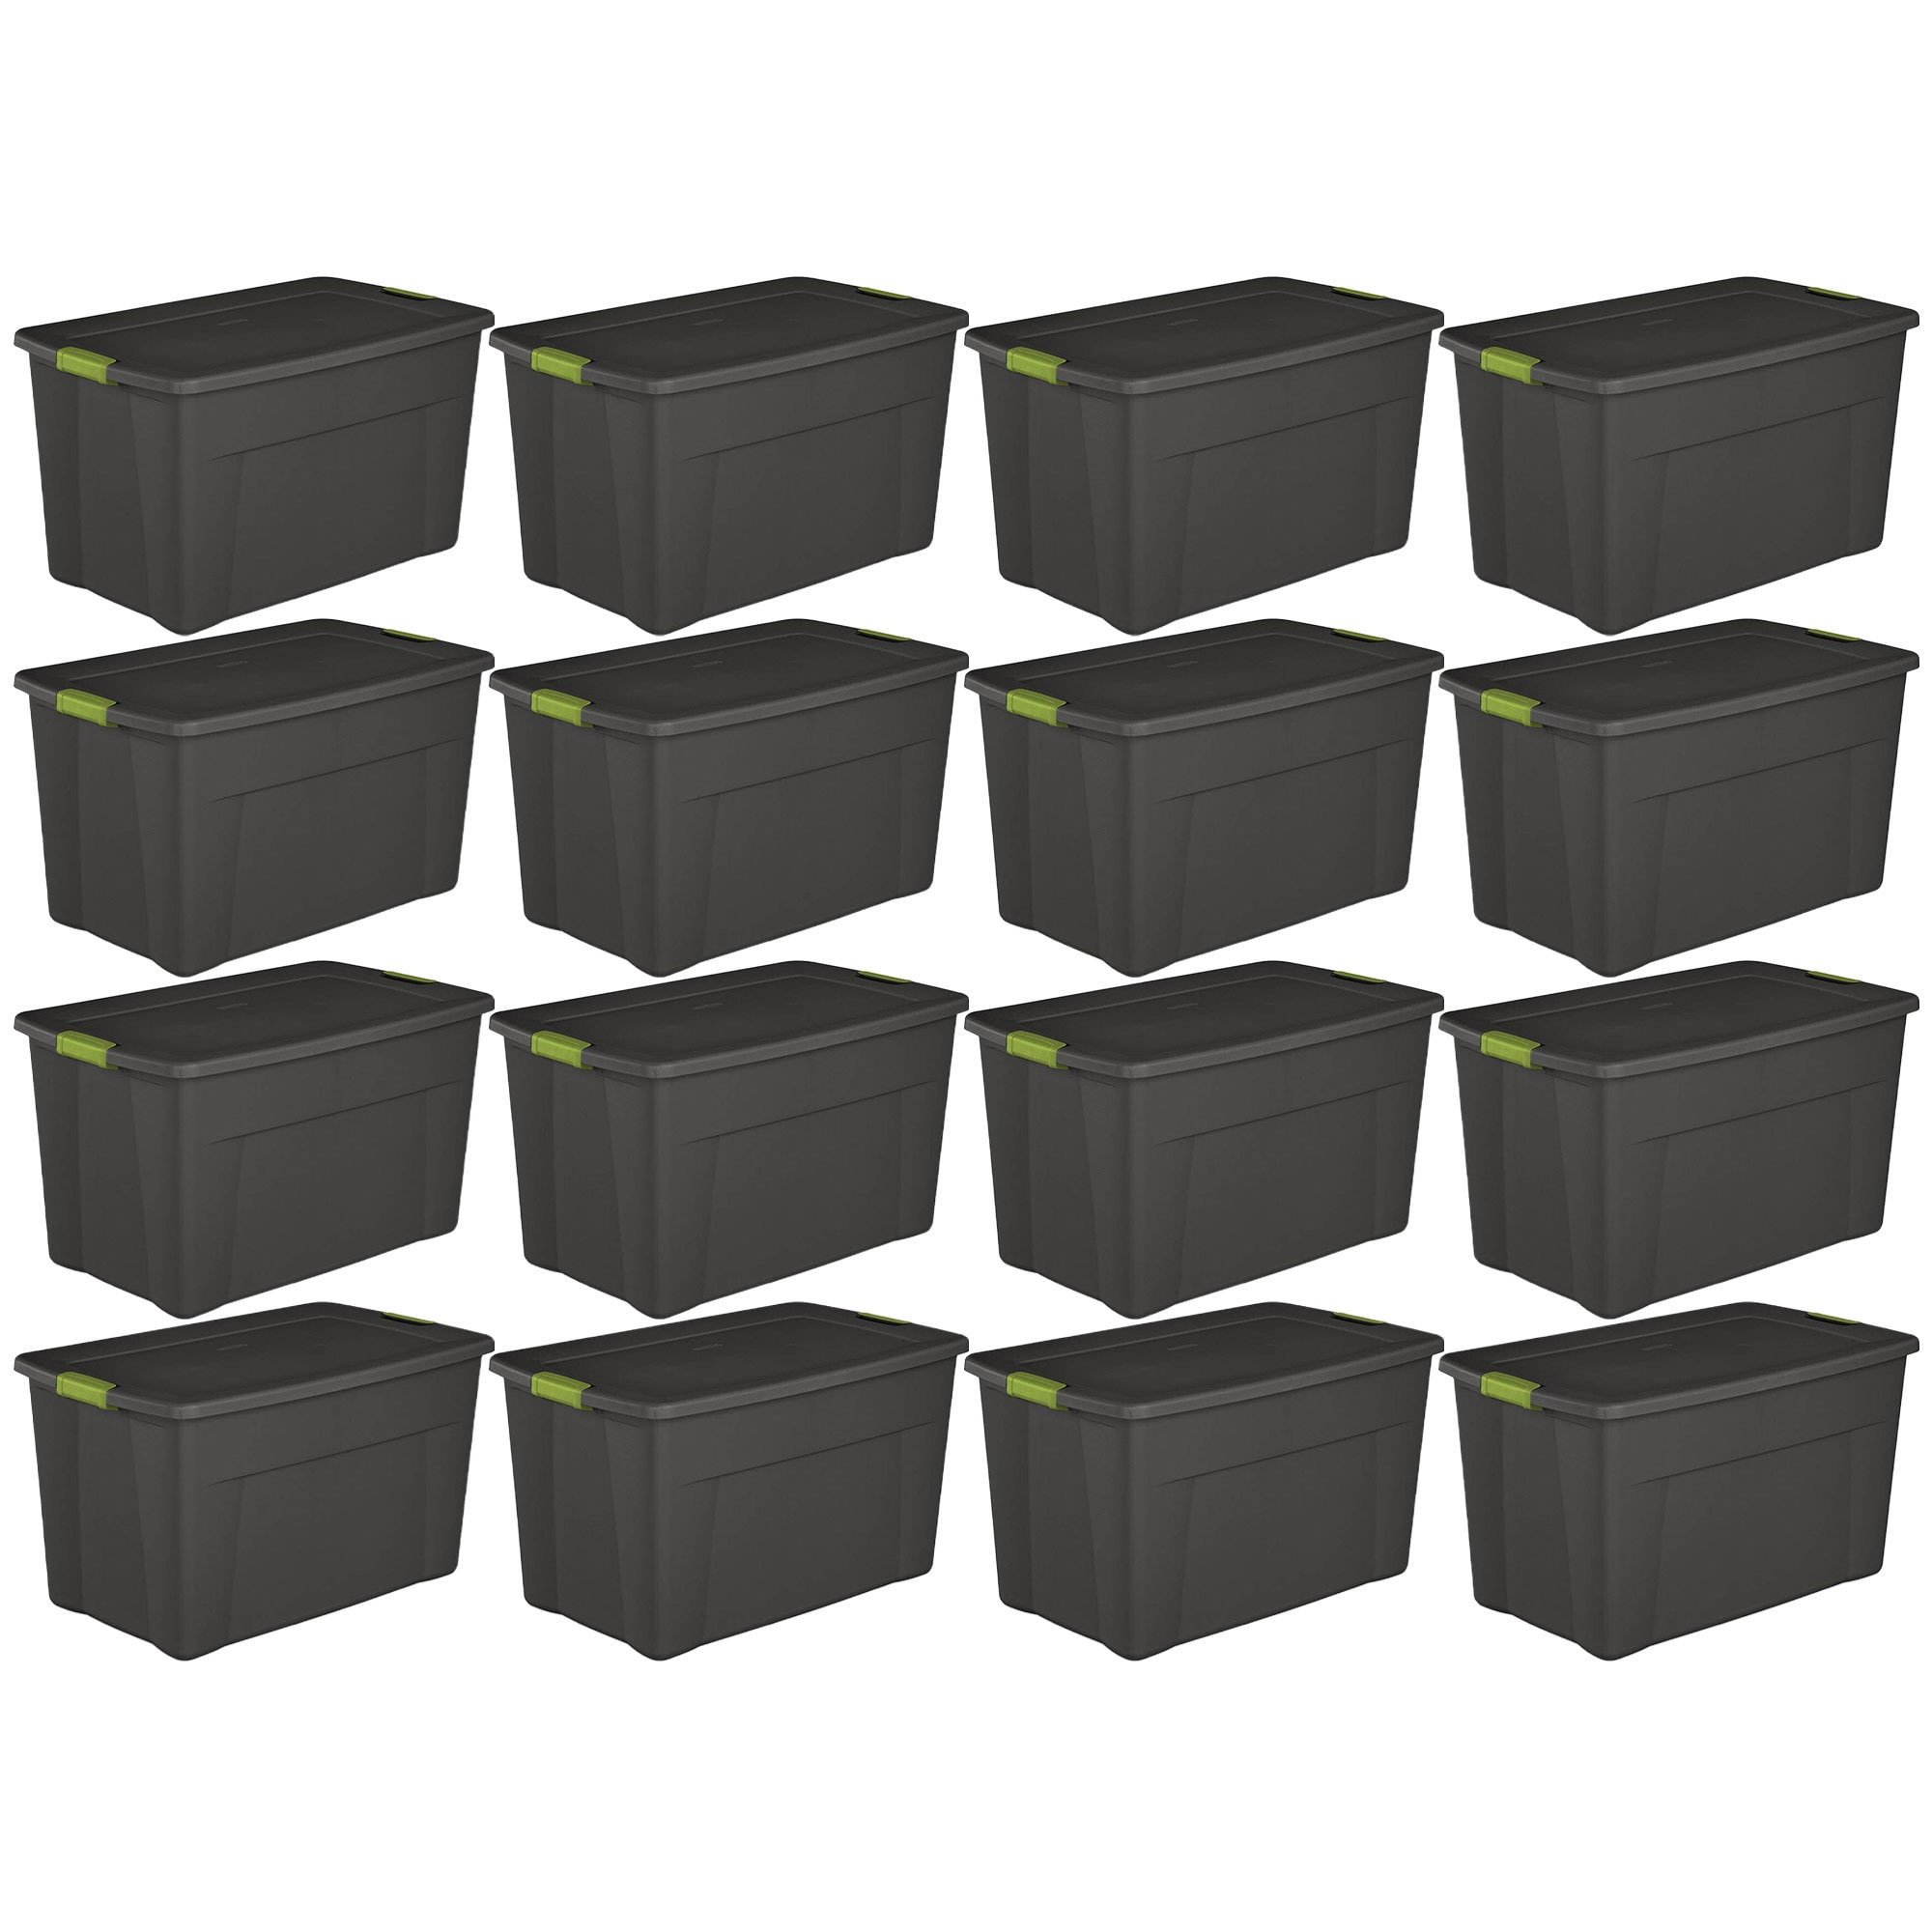 Sterilite 45 Gallon Heavy Duty Plastic Stackable Storage Container Tote  with Wheels and Latching Indexed Lid for Home Organization, Gray, 12 Pack